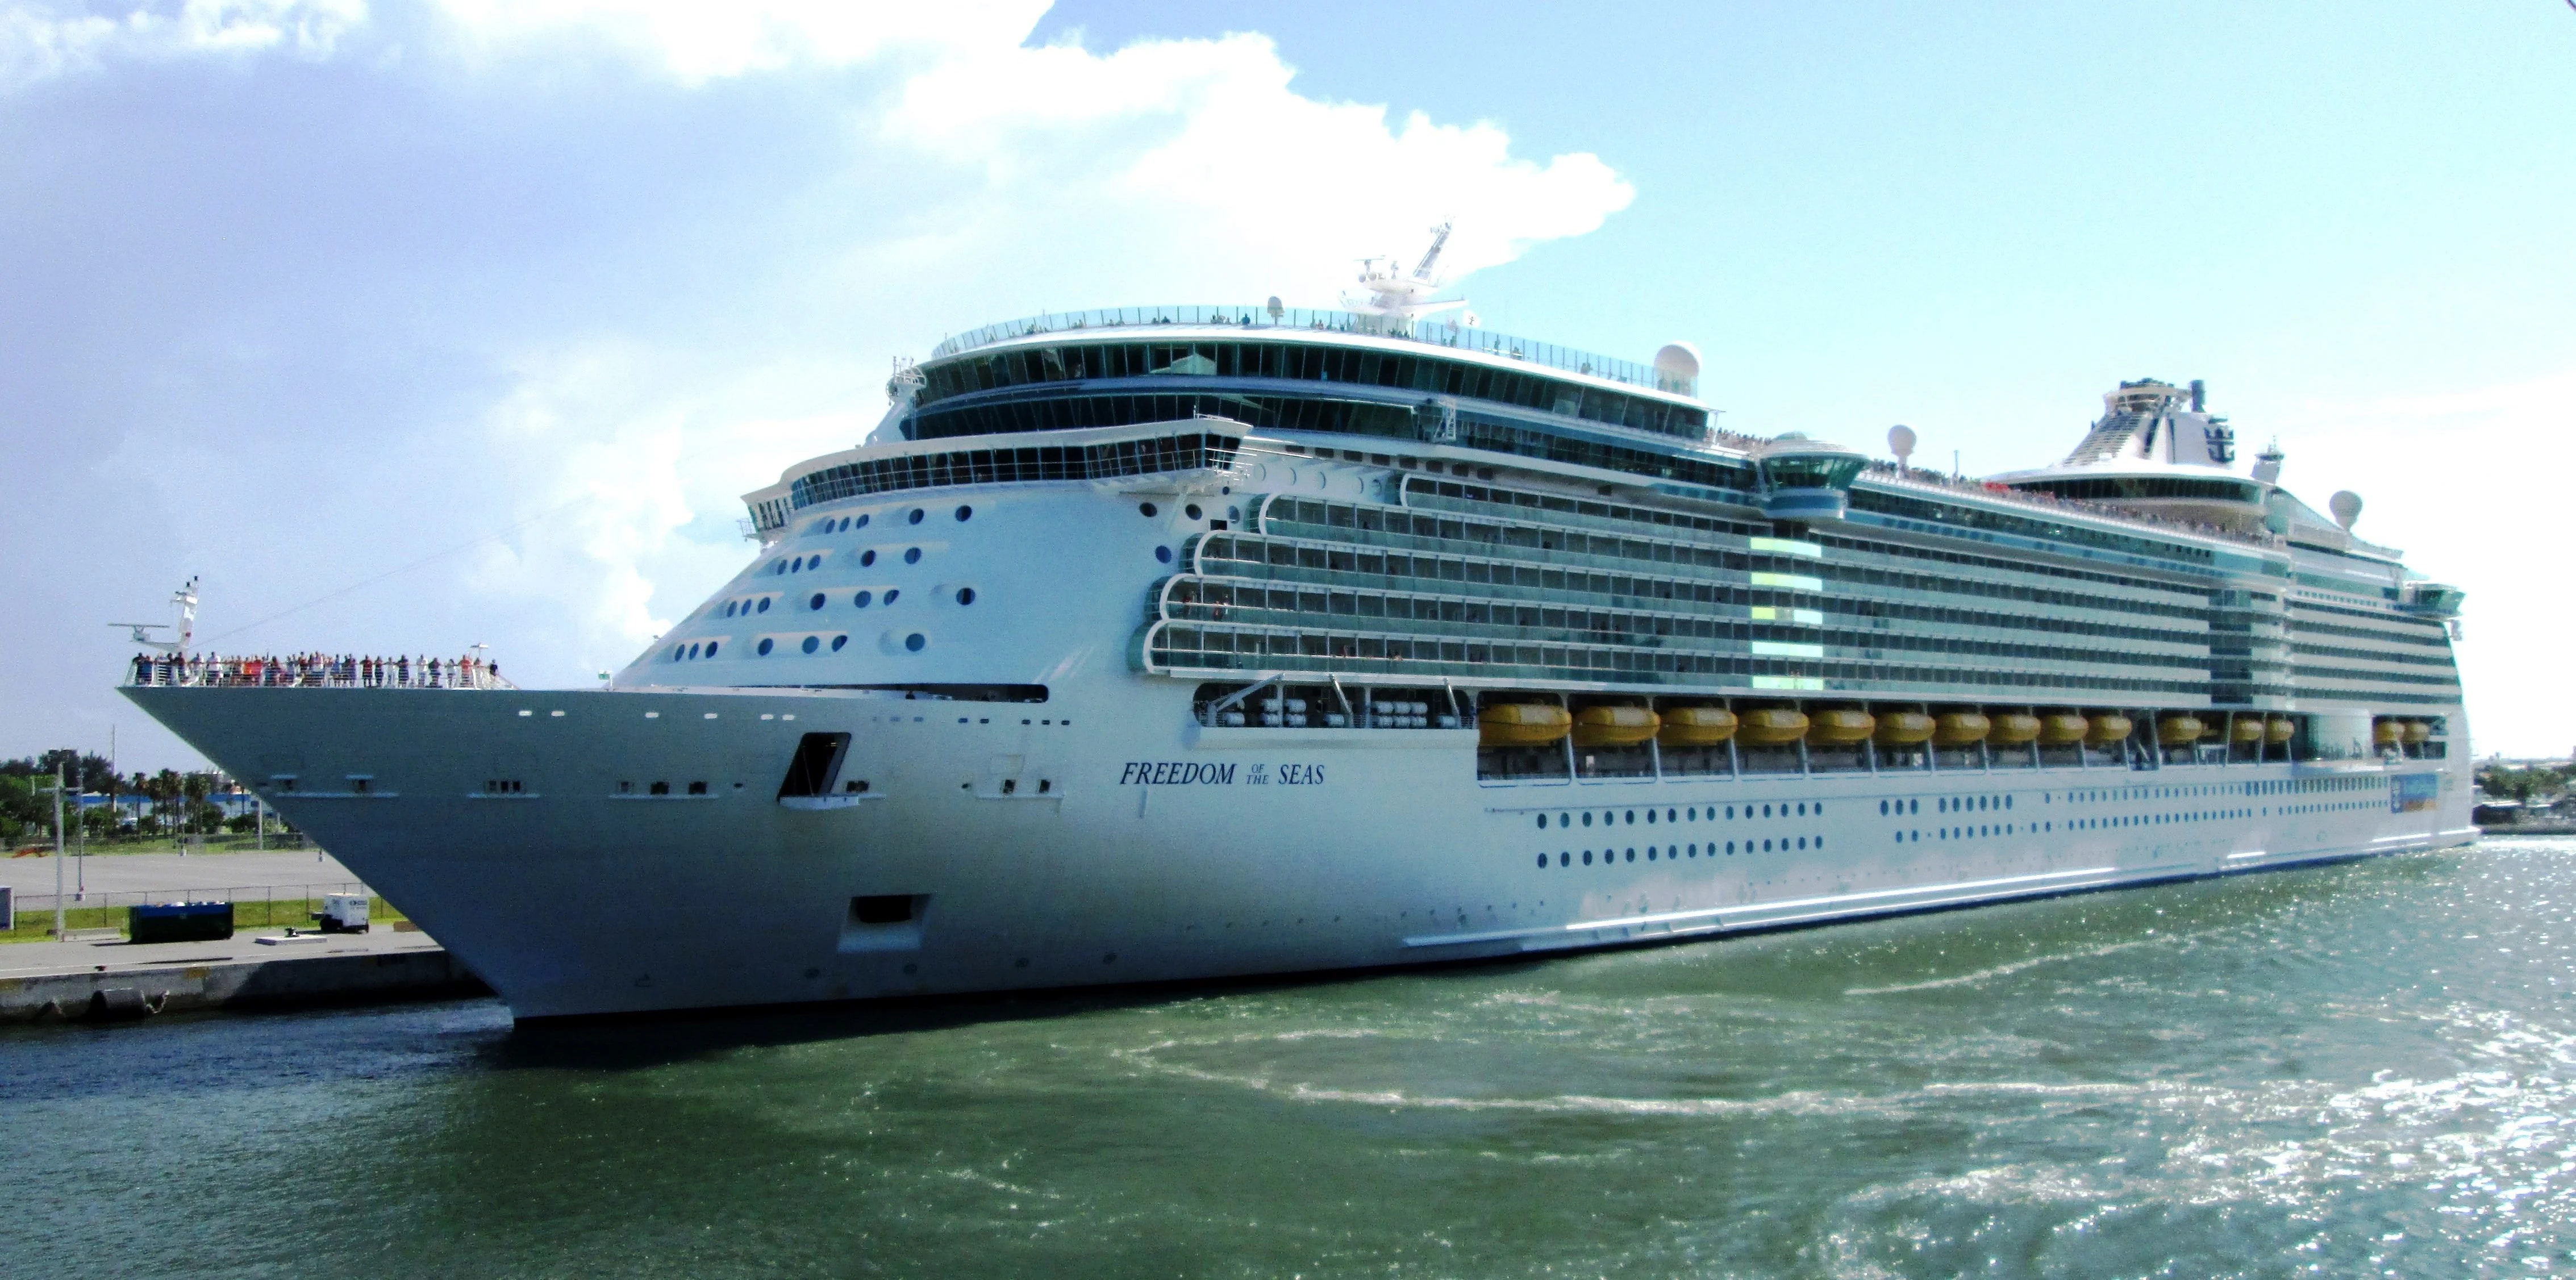 File:MS Freedom of the Seas, Port Canaveral, Florida.jpg - Wikimedia Commons